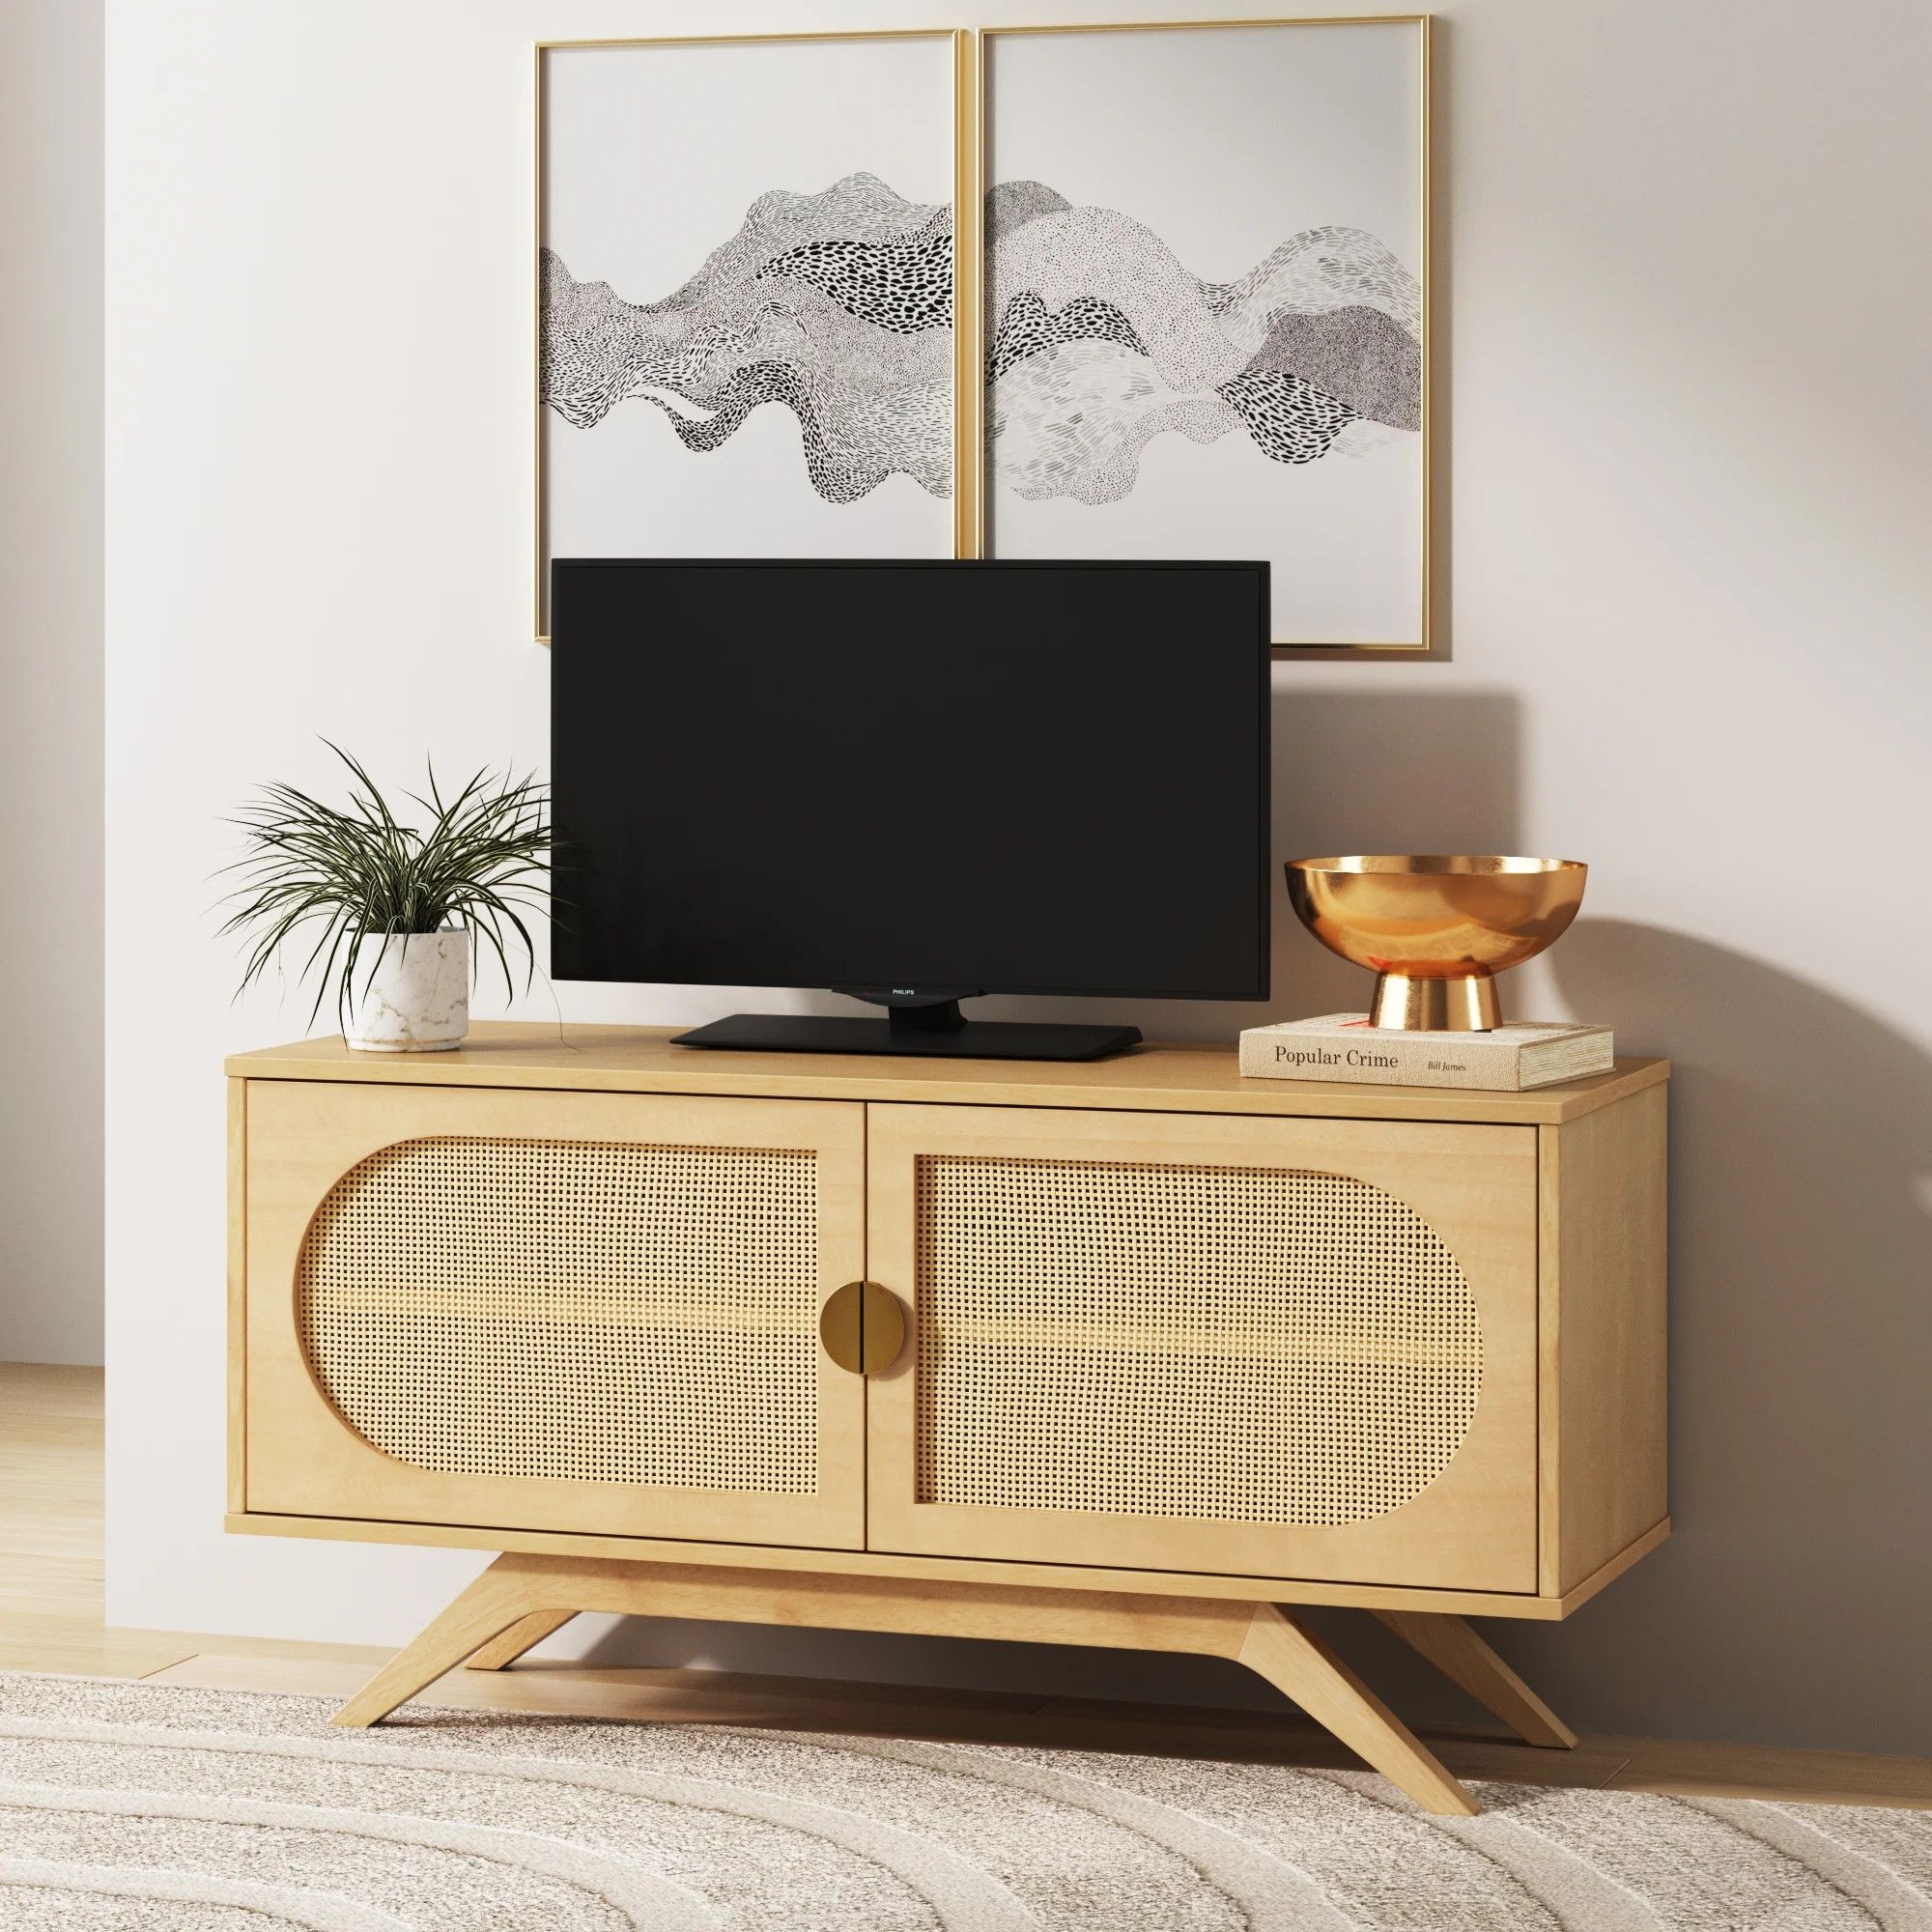 Rattan & Wood Rounded Door TV Cabinet | Nathan James